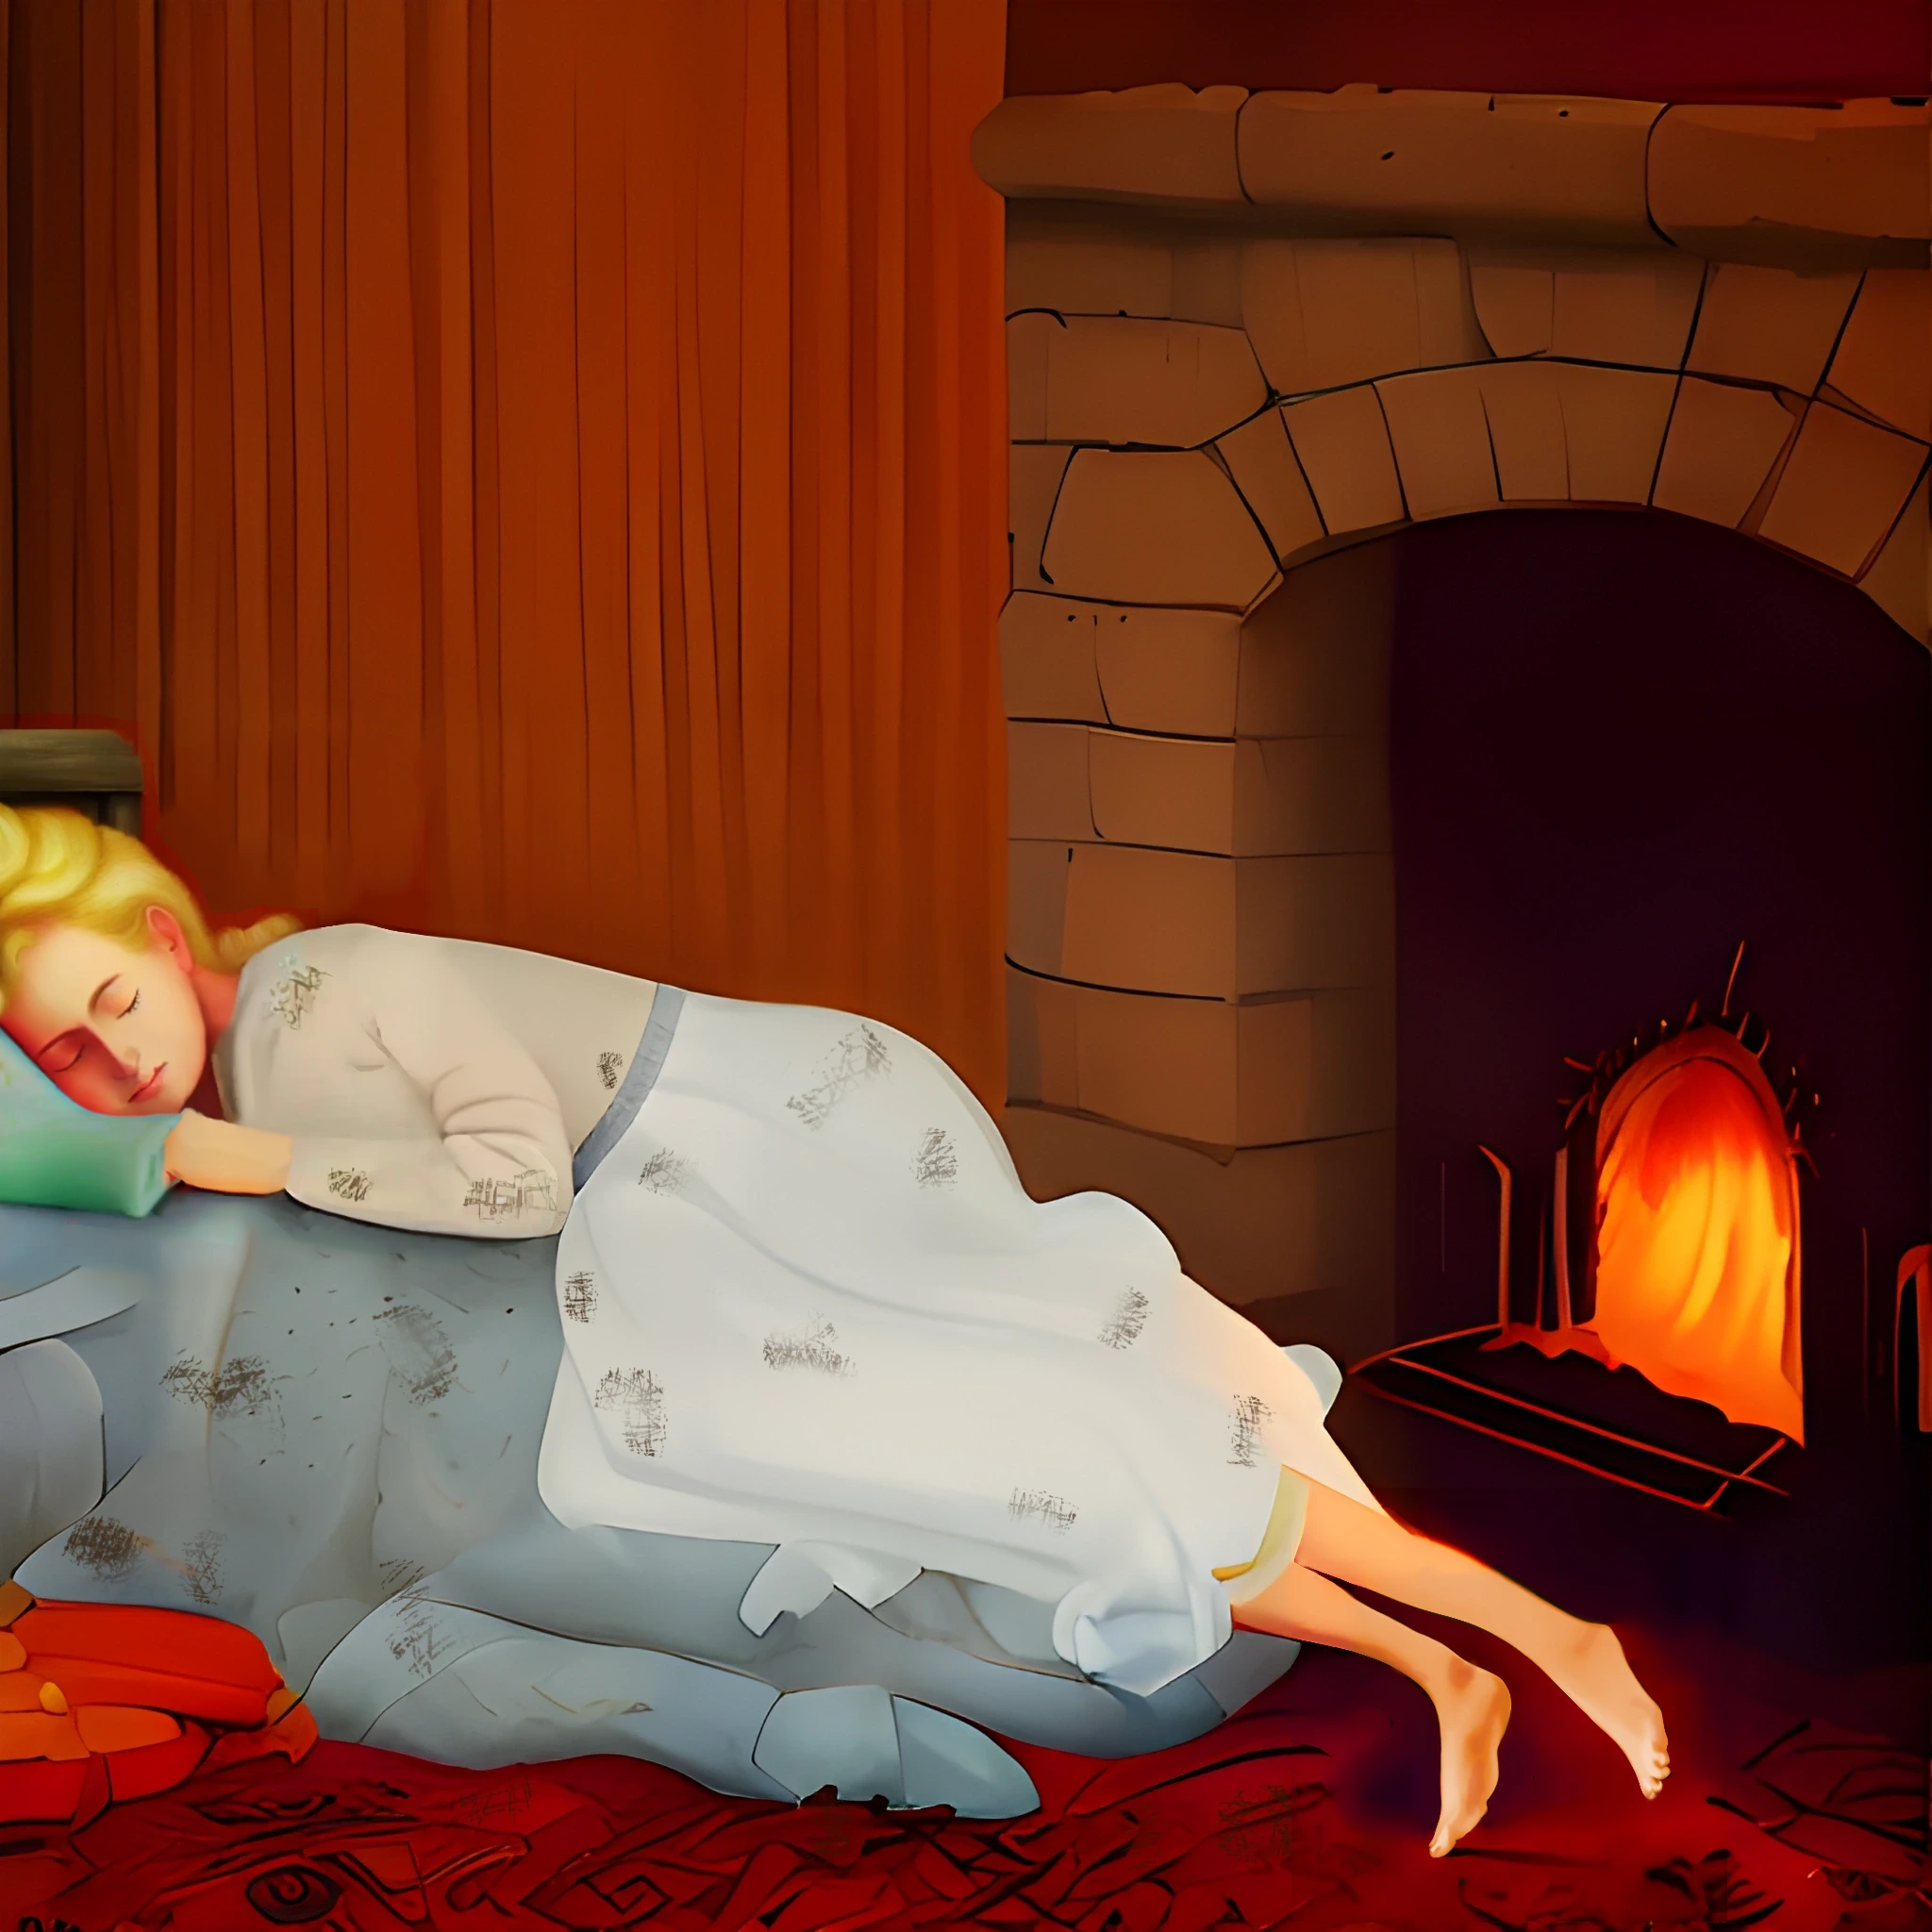 Cinderella asleep by the fireplace